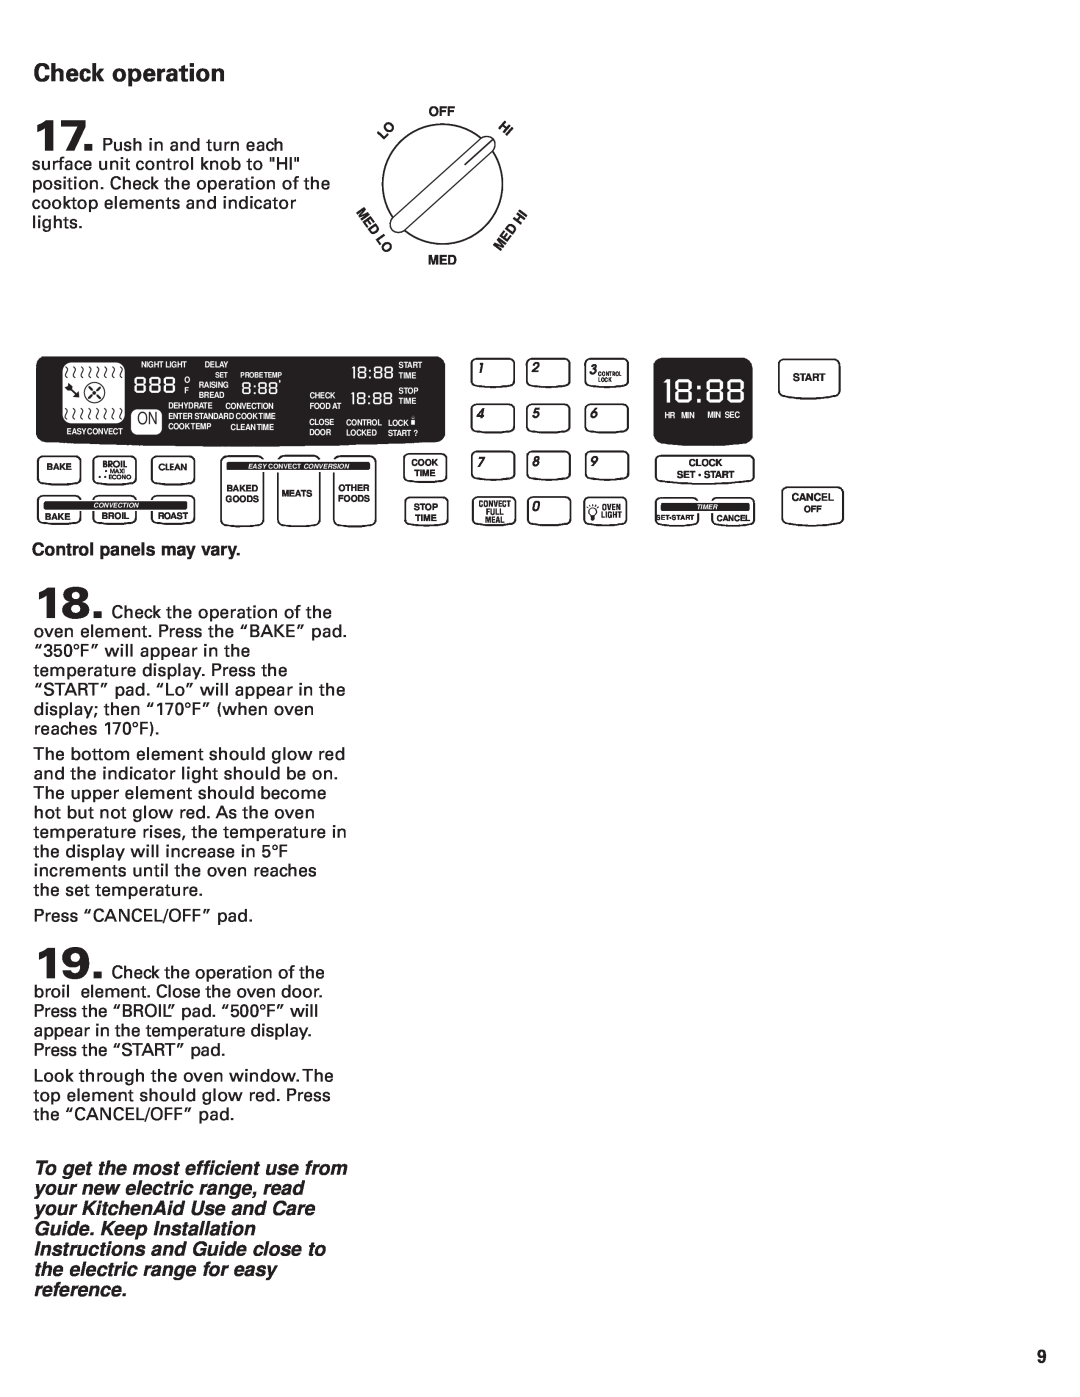 KitchenAid Convection Oven installation instructions Check operation, Control panels may vary, 1888, 888 F, Med Lo 